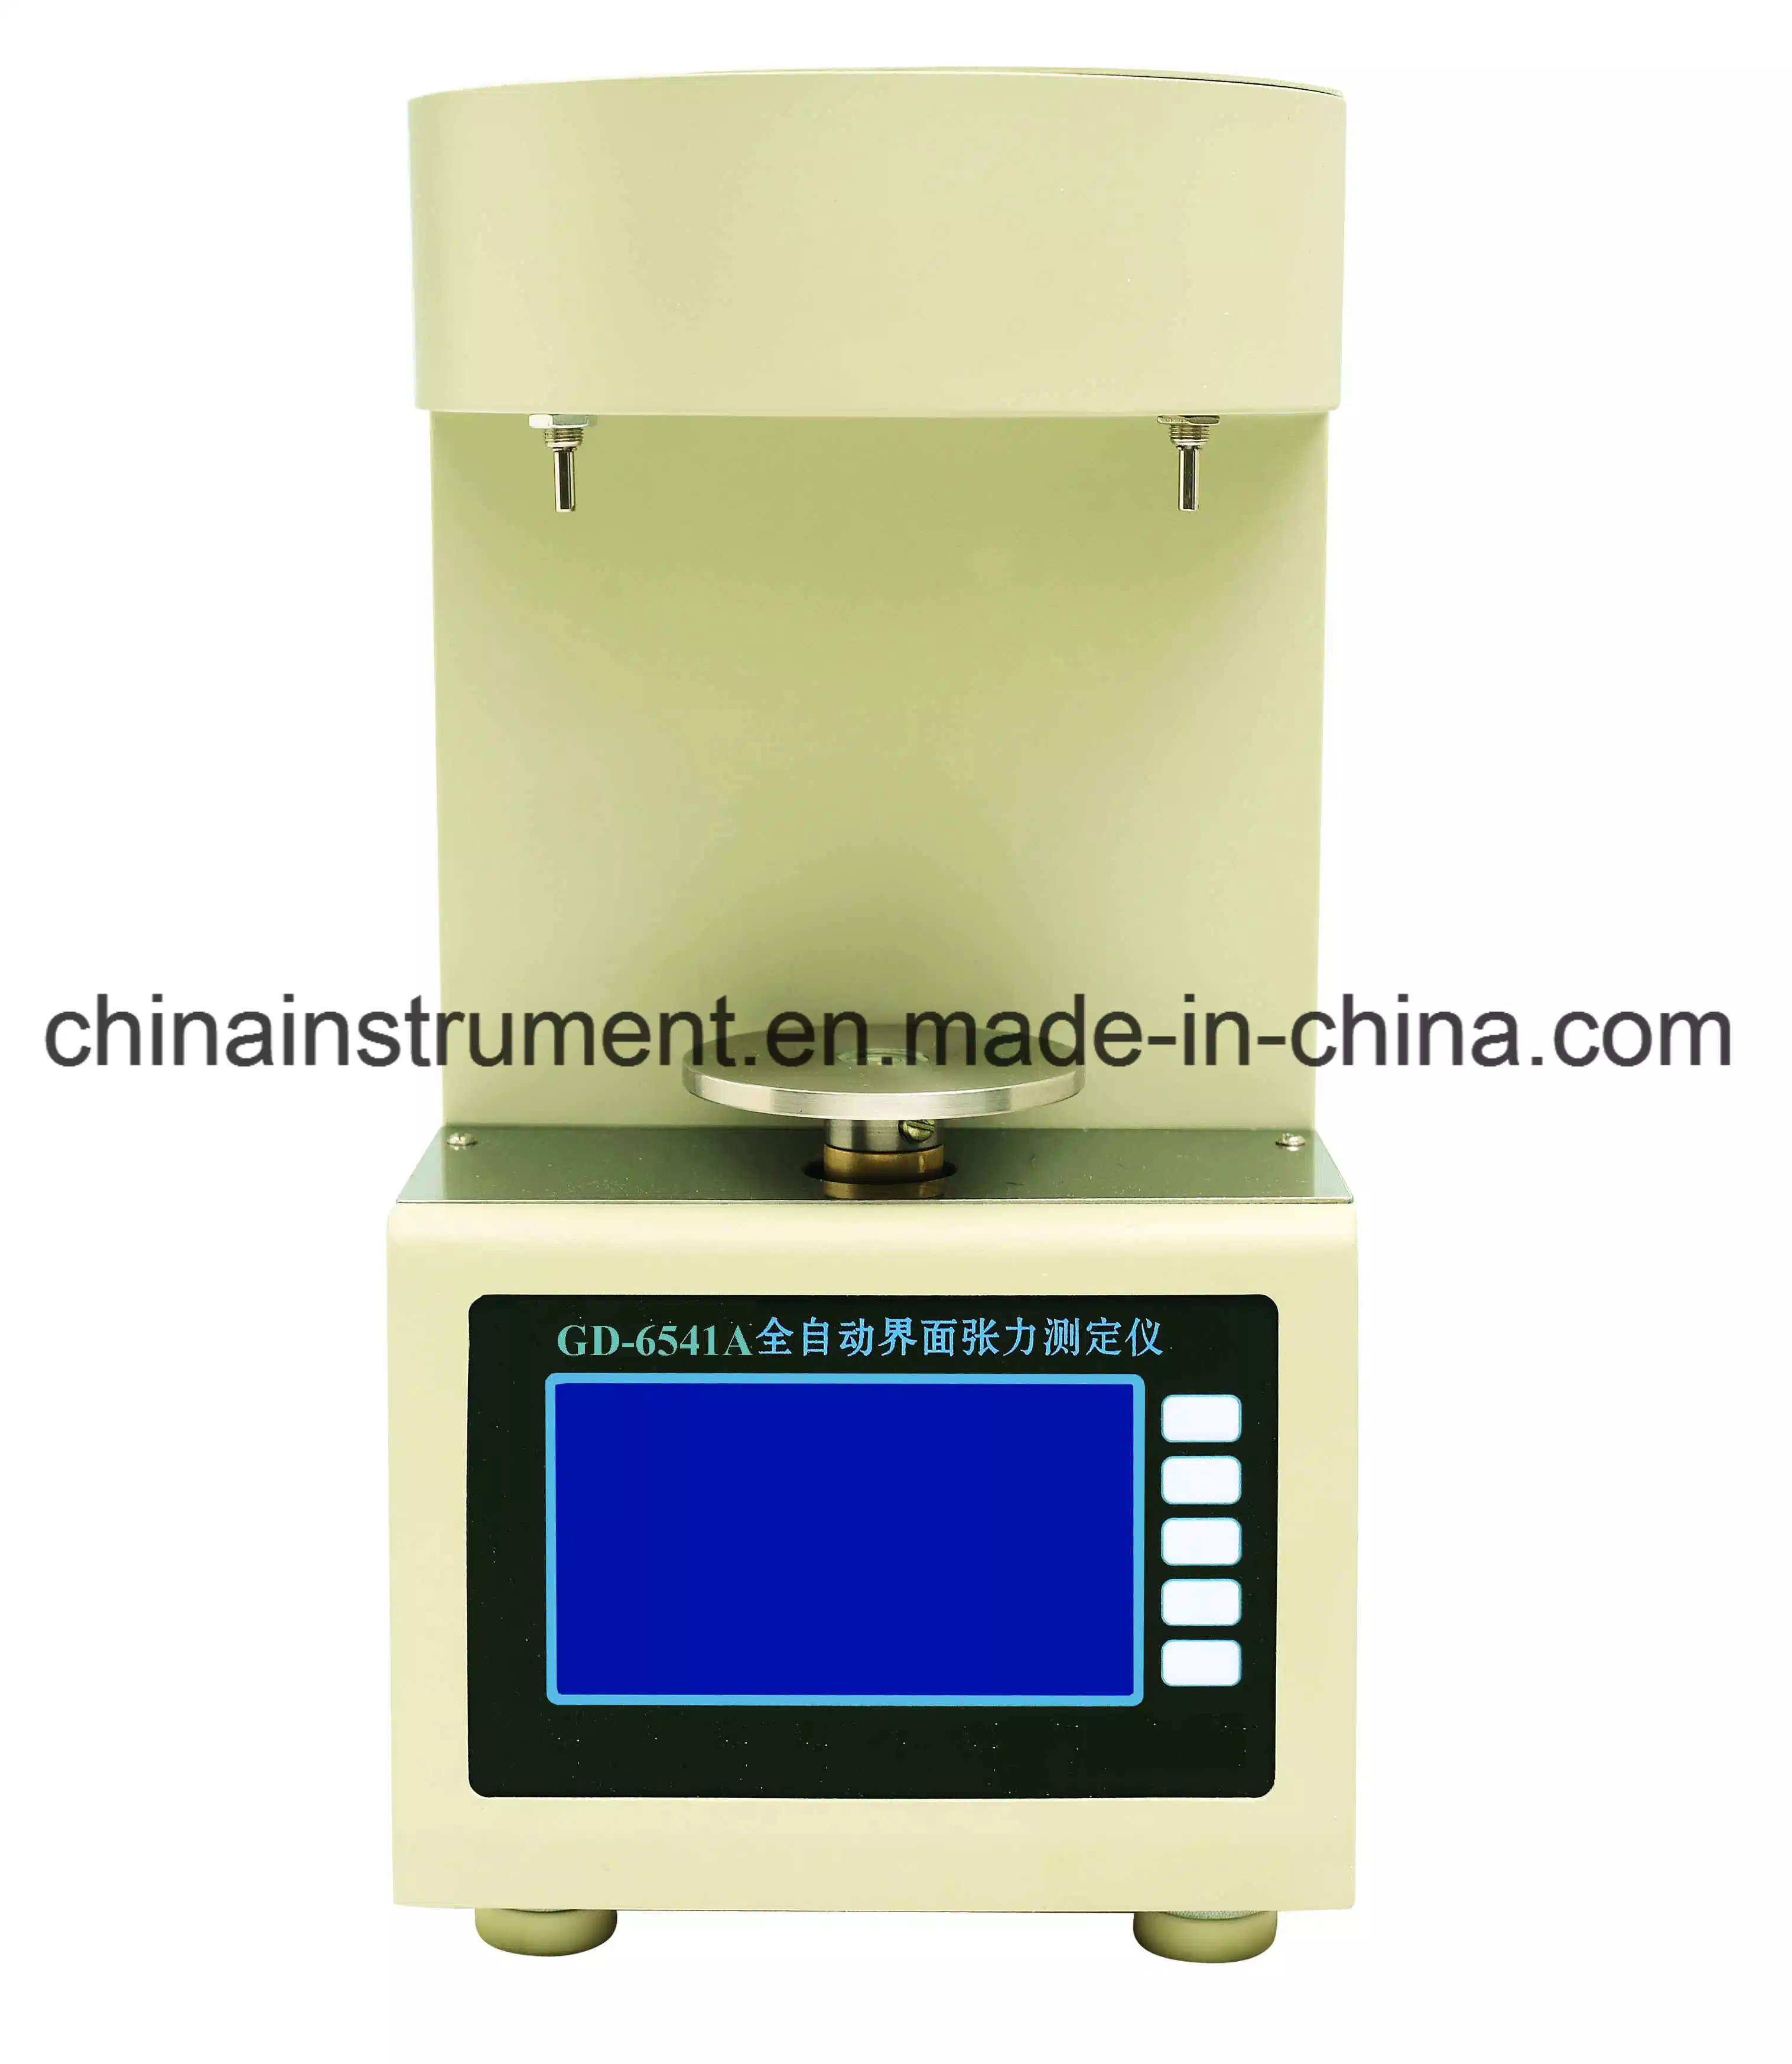 ASTM D971 Interfacial Tension Tester by Moderate Price